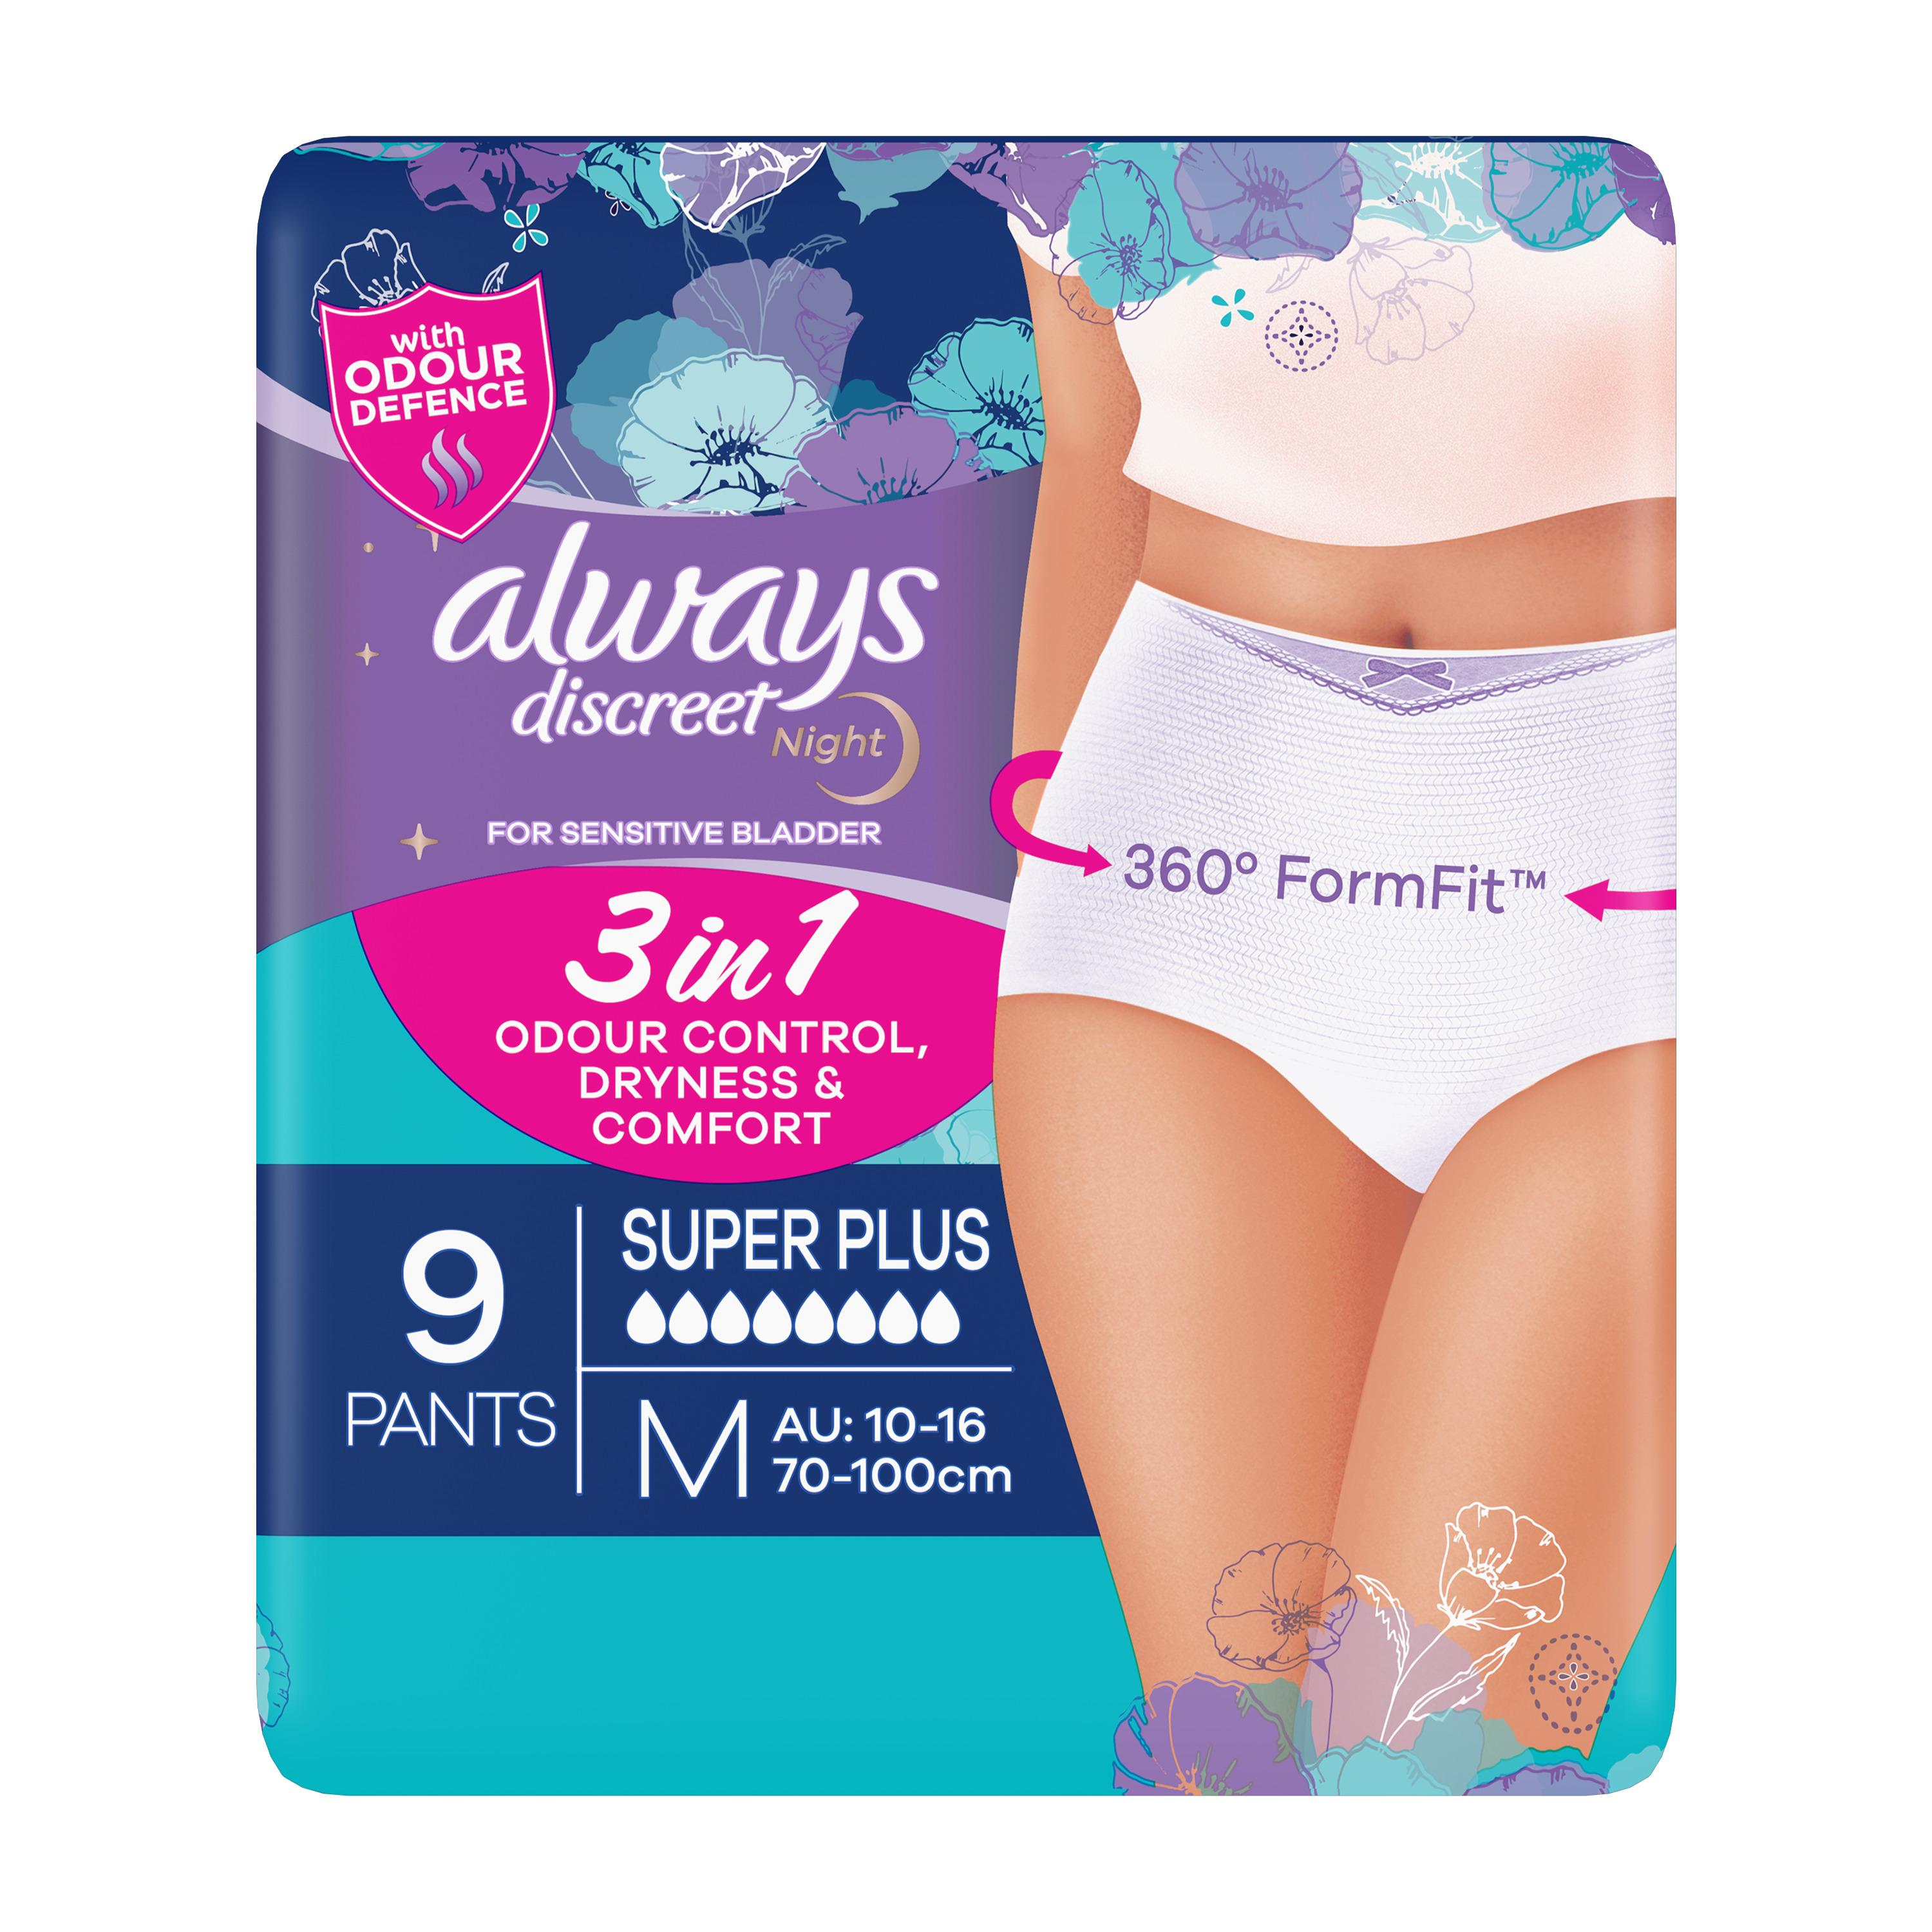 Adult Incontinence Pants & Underwear